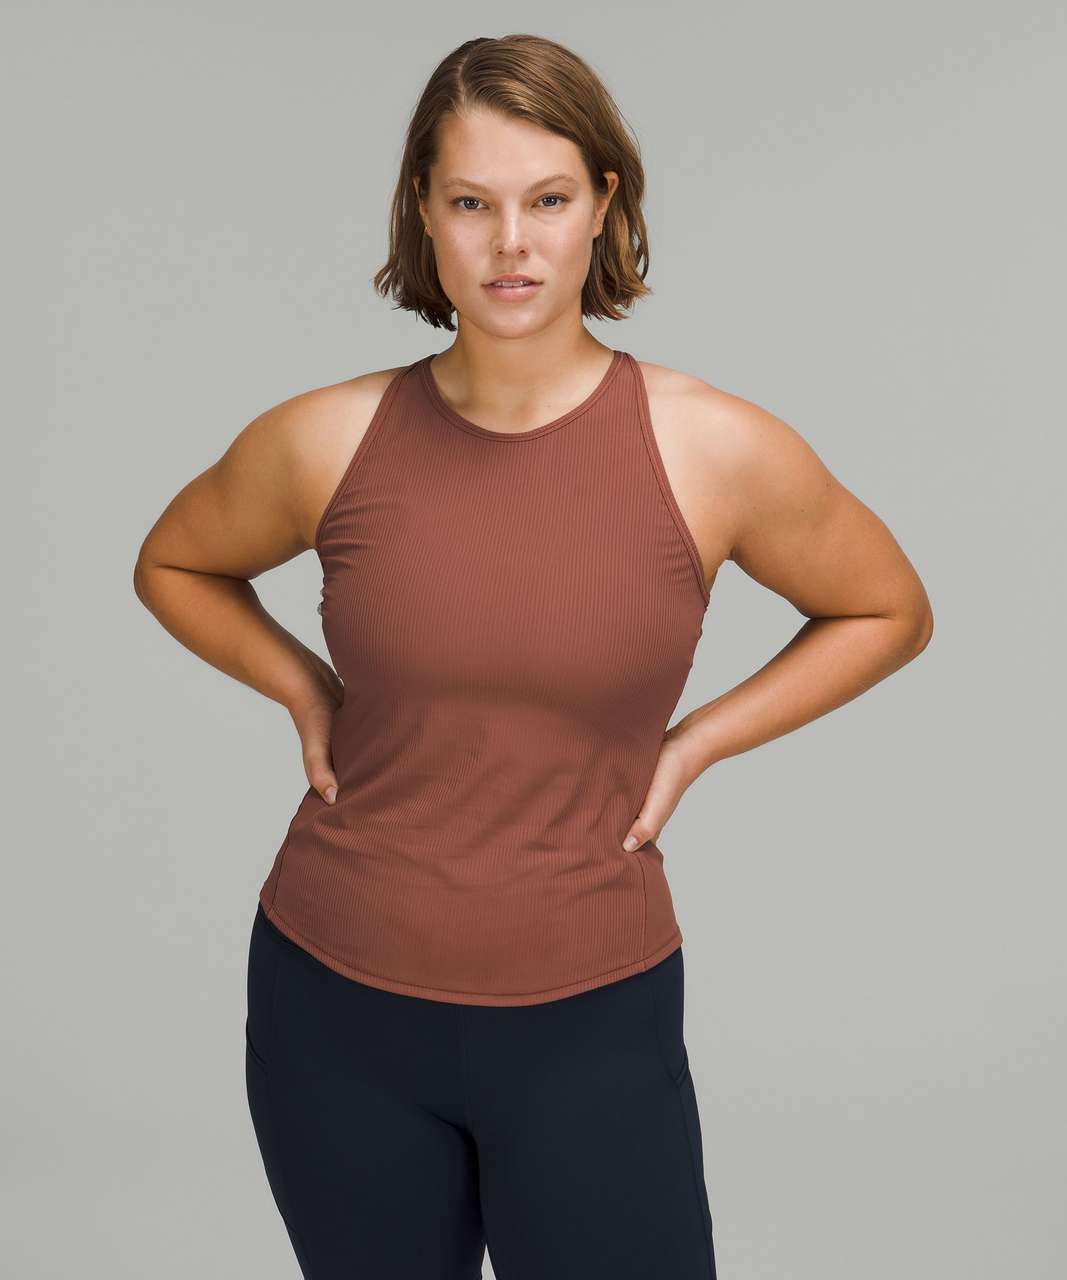 Lululemon Base Pace Ribbed Tank Top - Ancient Copper